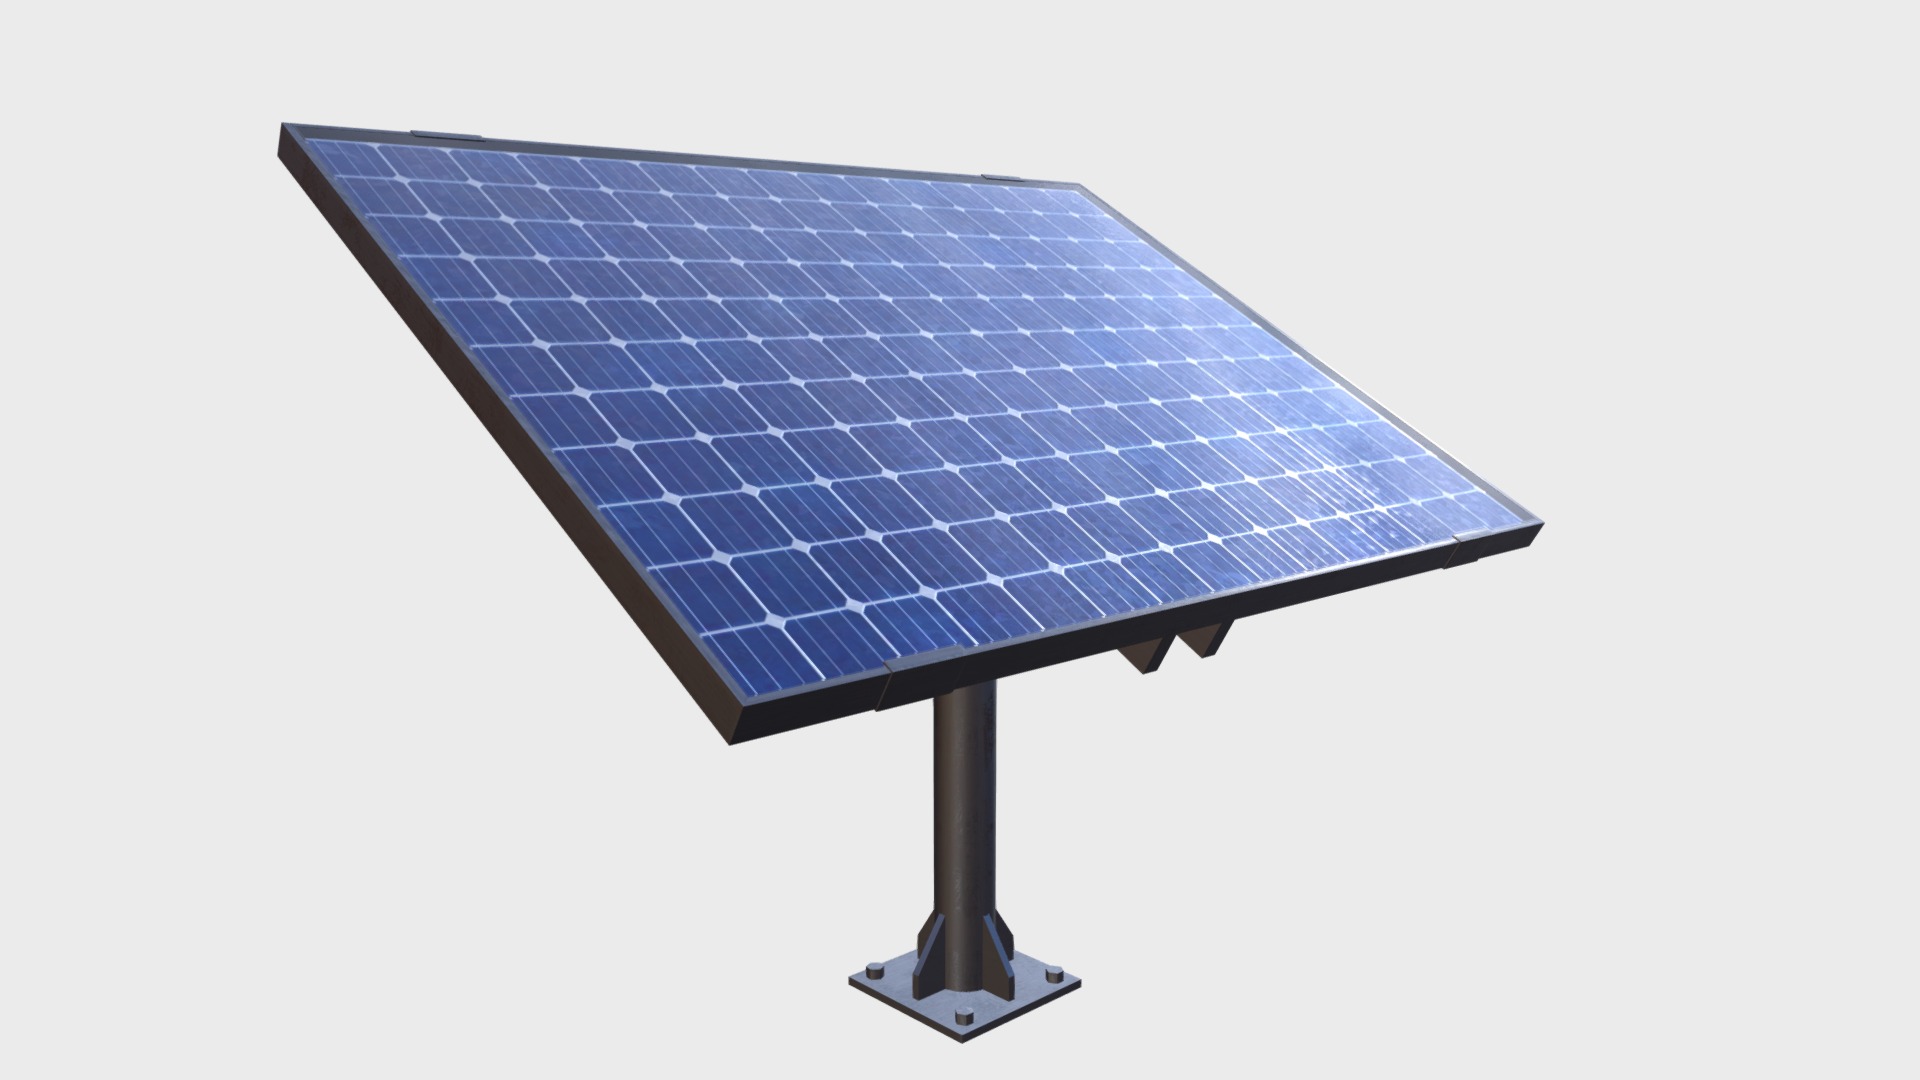 3D model Solar panel on pole stand - This is a 3D model of the Solar panel on pole stand. The 3D model is about a solar panel on a pole.